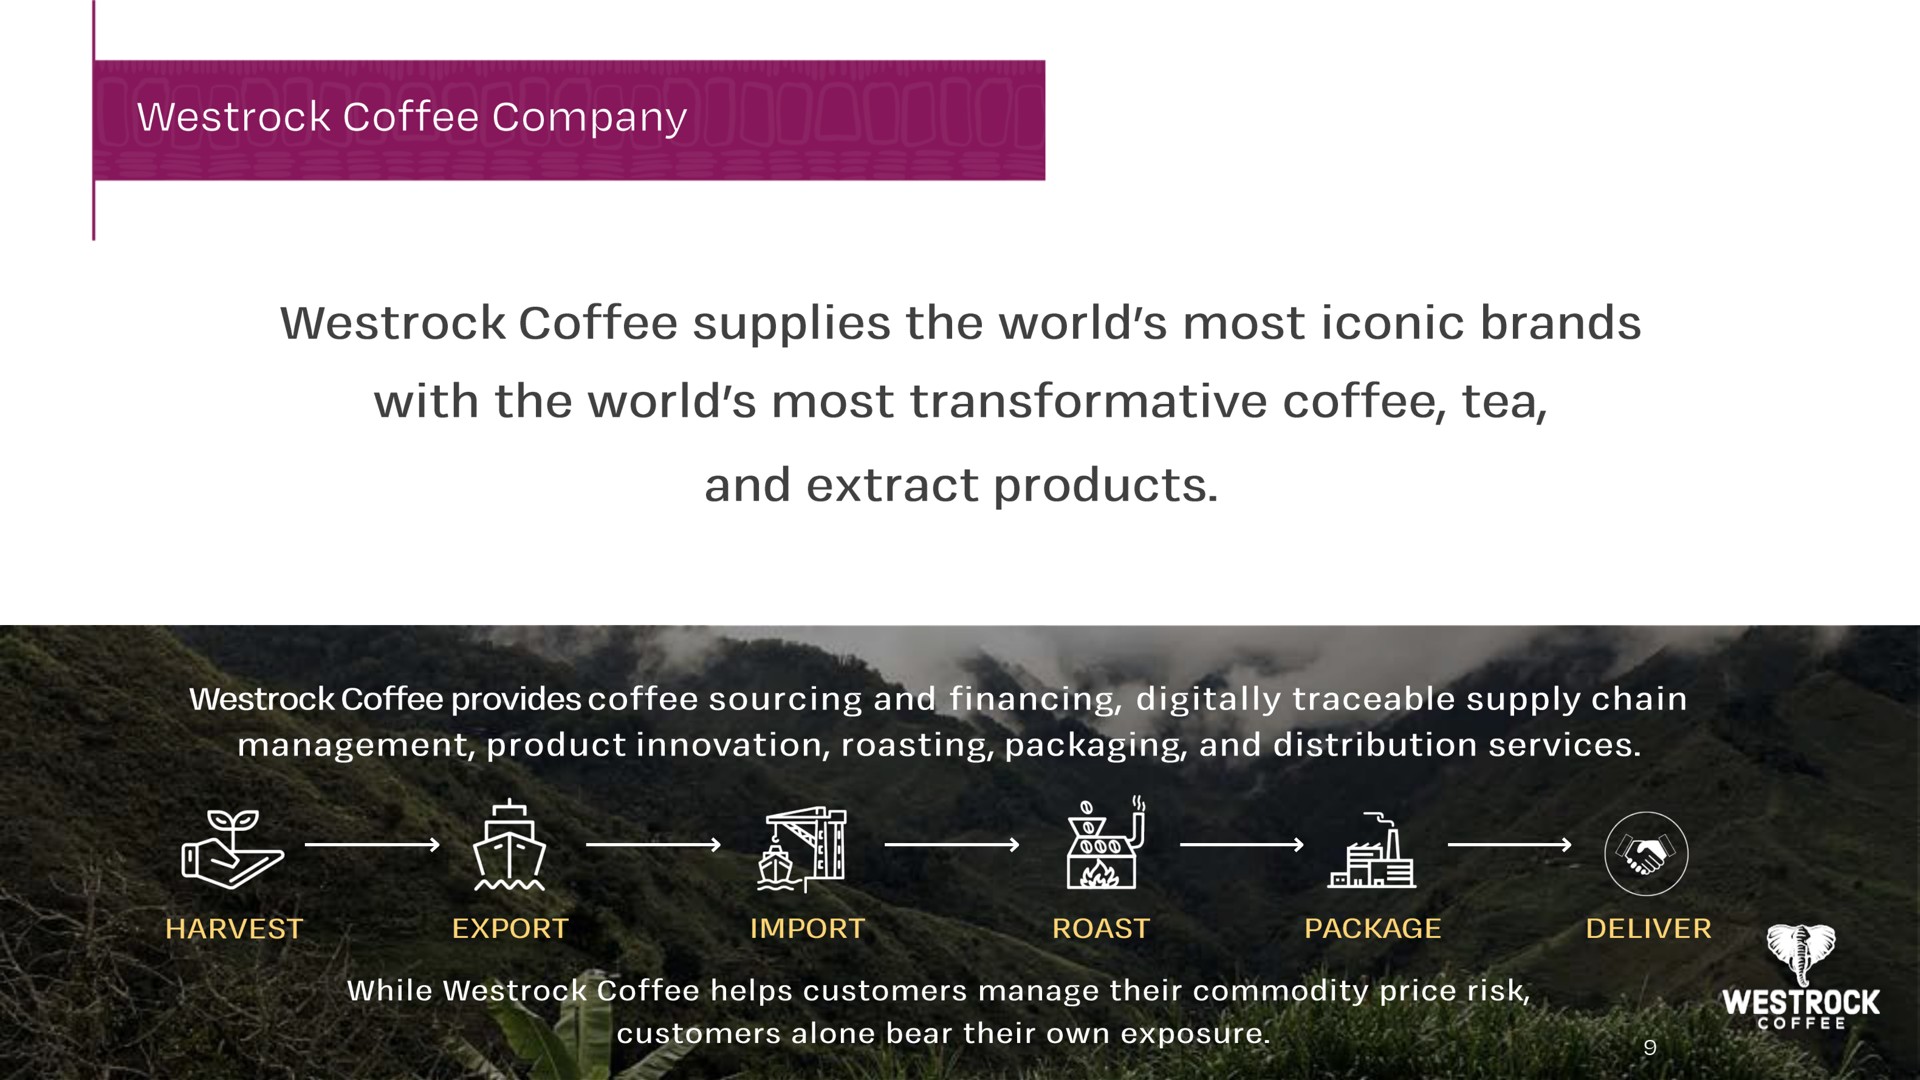 coffee company coffee supplies the world most iconic brands with the world most transformative coffee tea and extract products a | Westrock Coffee